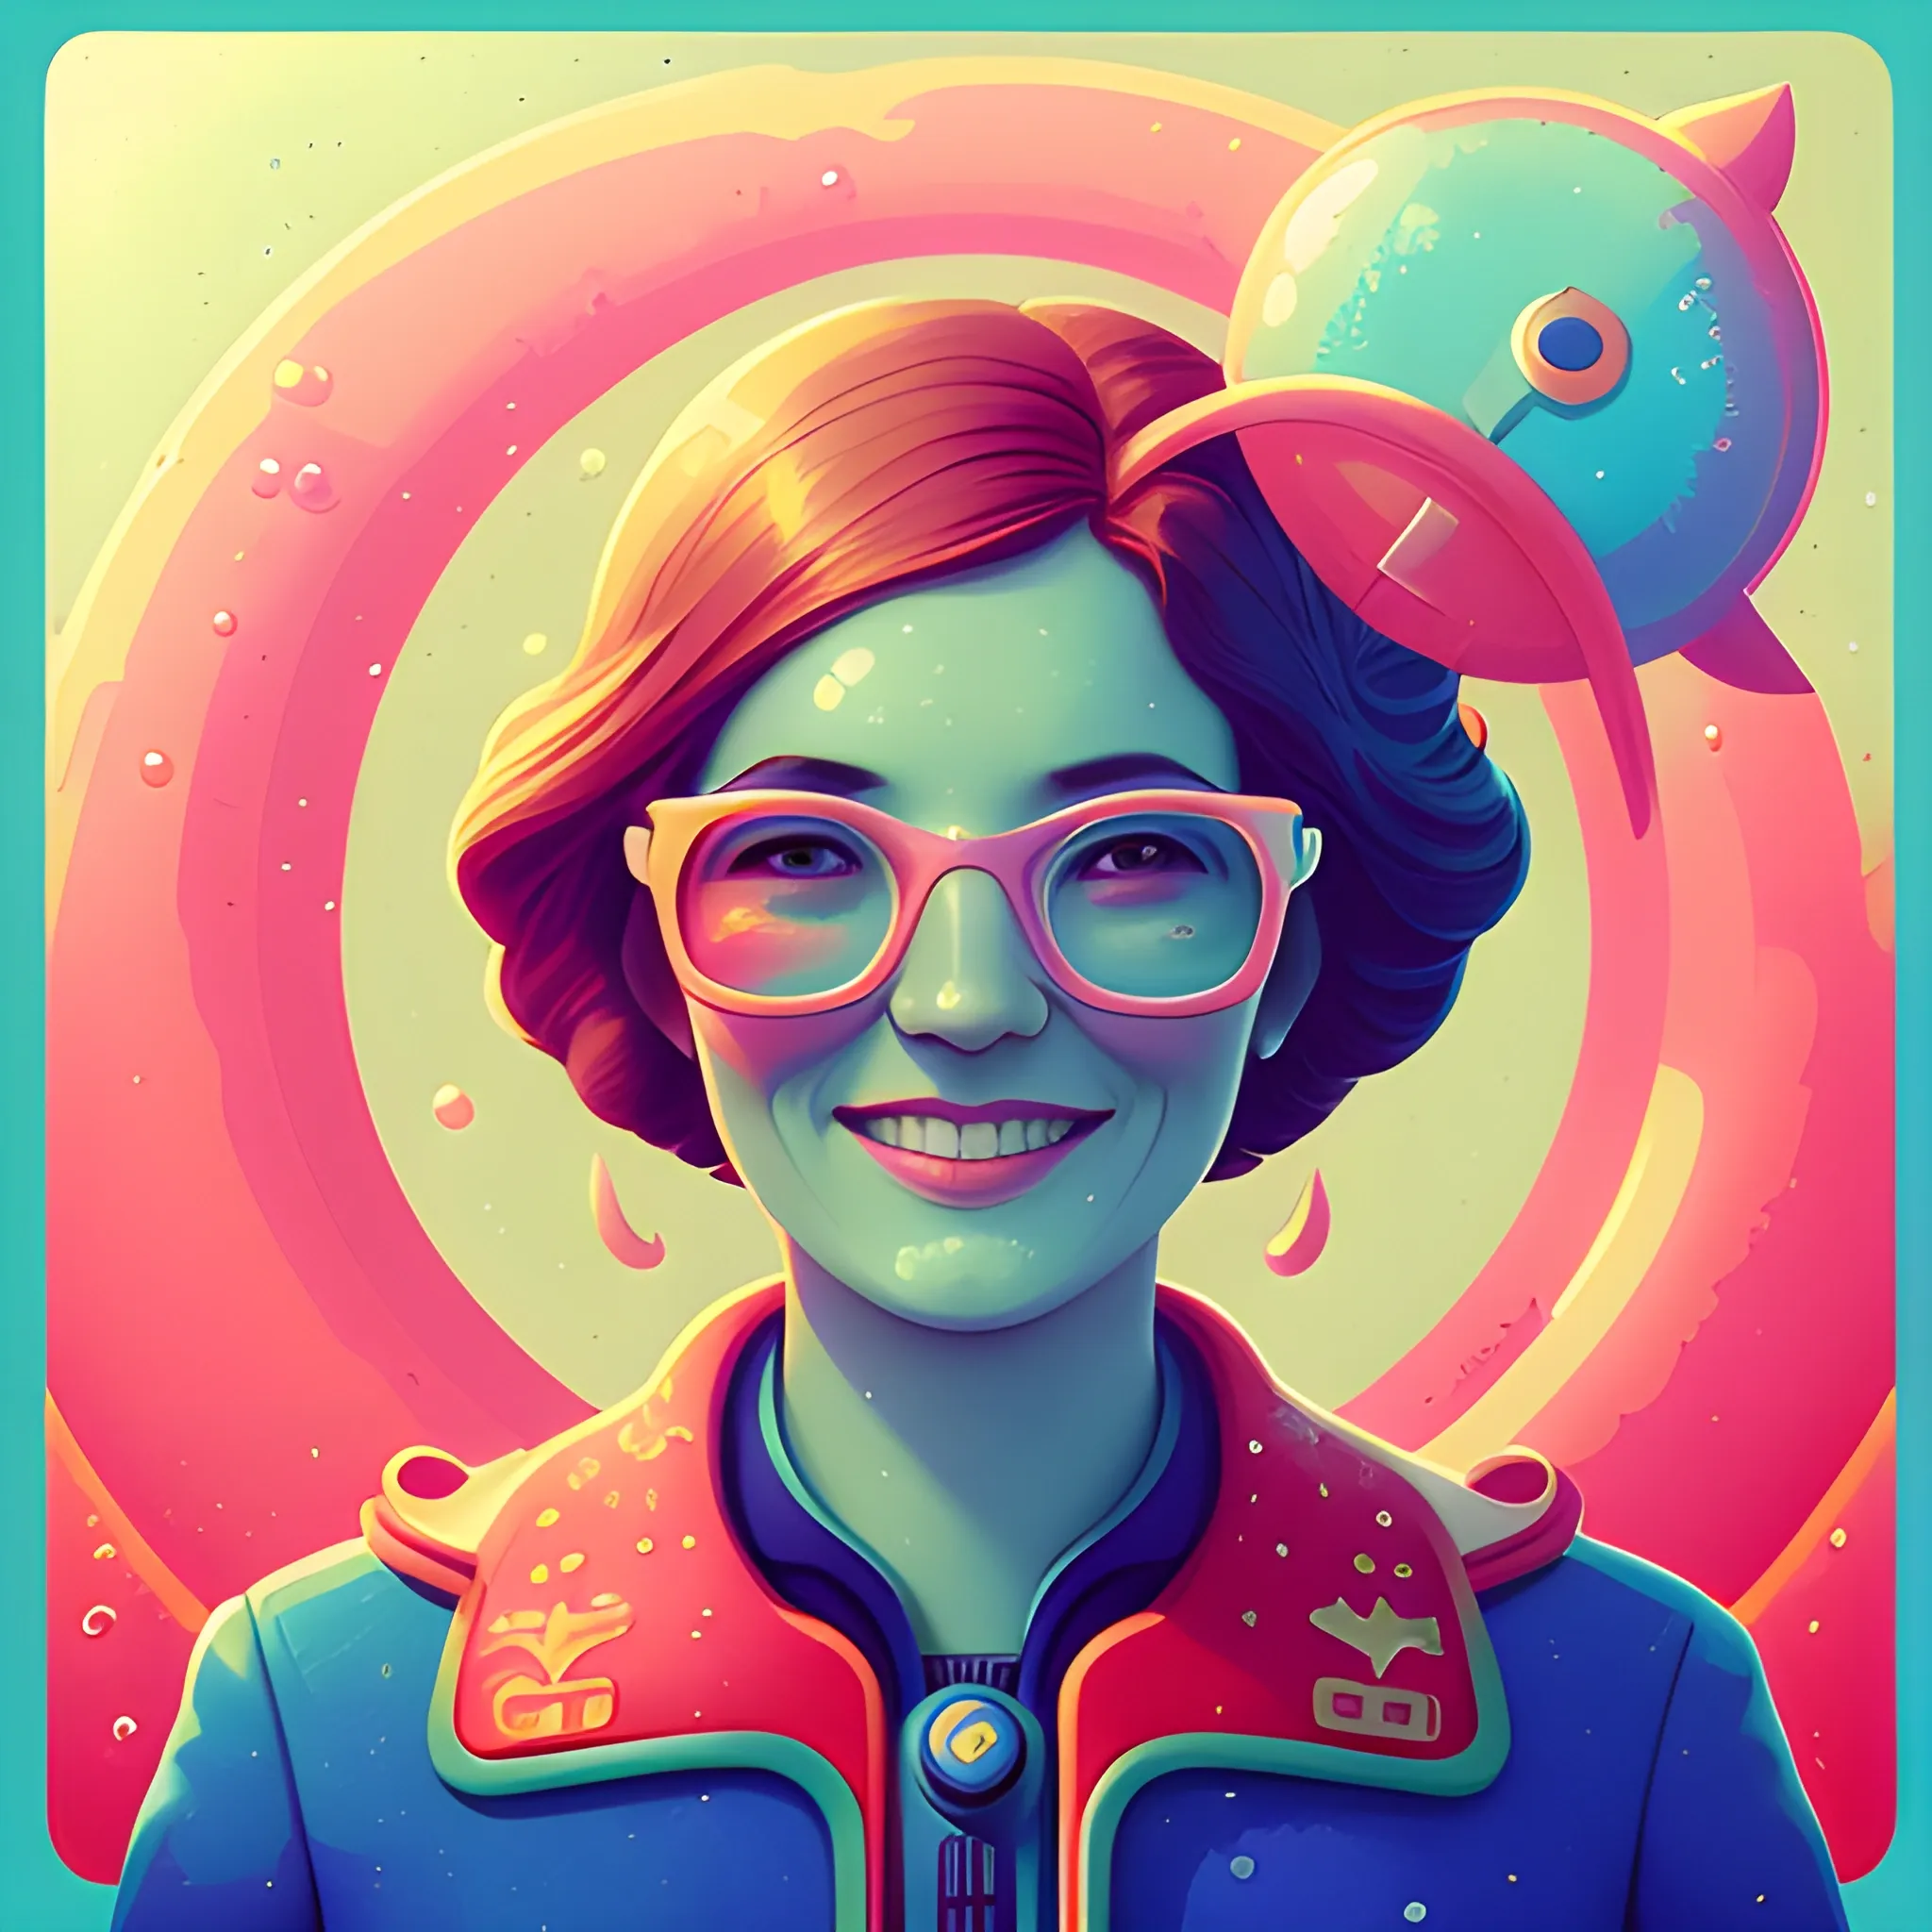 Friendly wise female government workiner. Should be warm, cheerful, knowledgeable, and smiling. by petros afshar, ross tran, Tom Bagshaw, tom whalen, underwater bubbly psychedelic clouds, Anaglyph 3D lens blur effect
